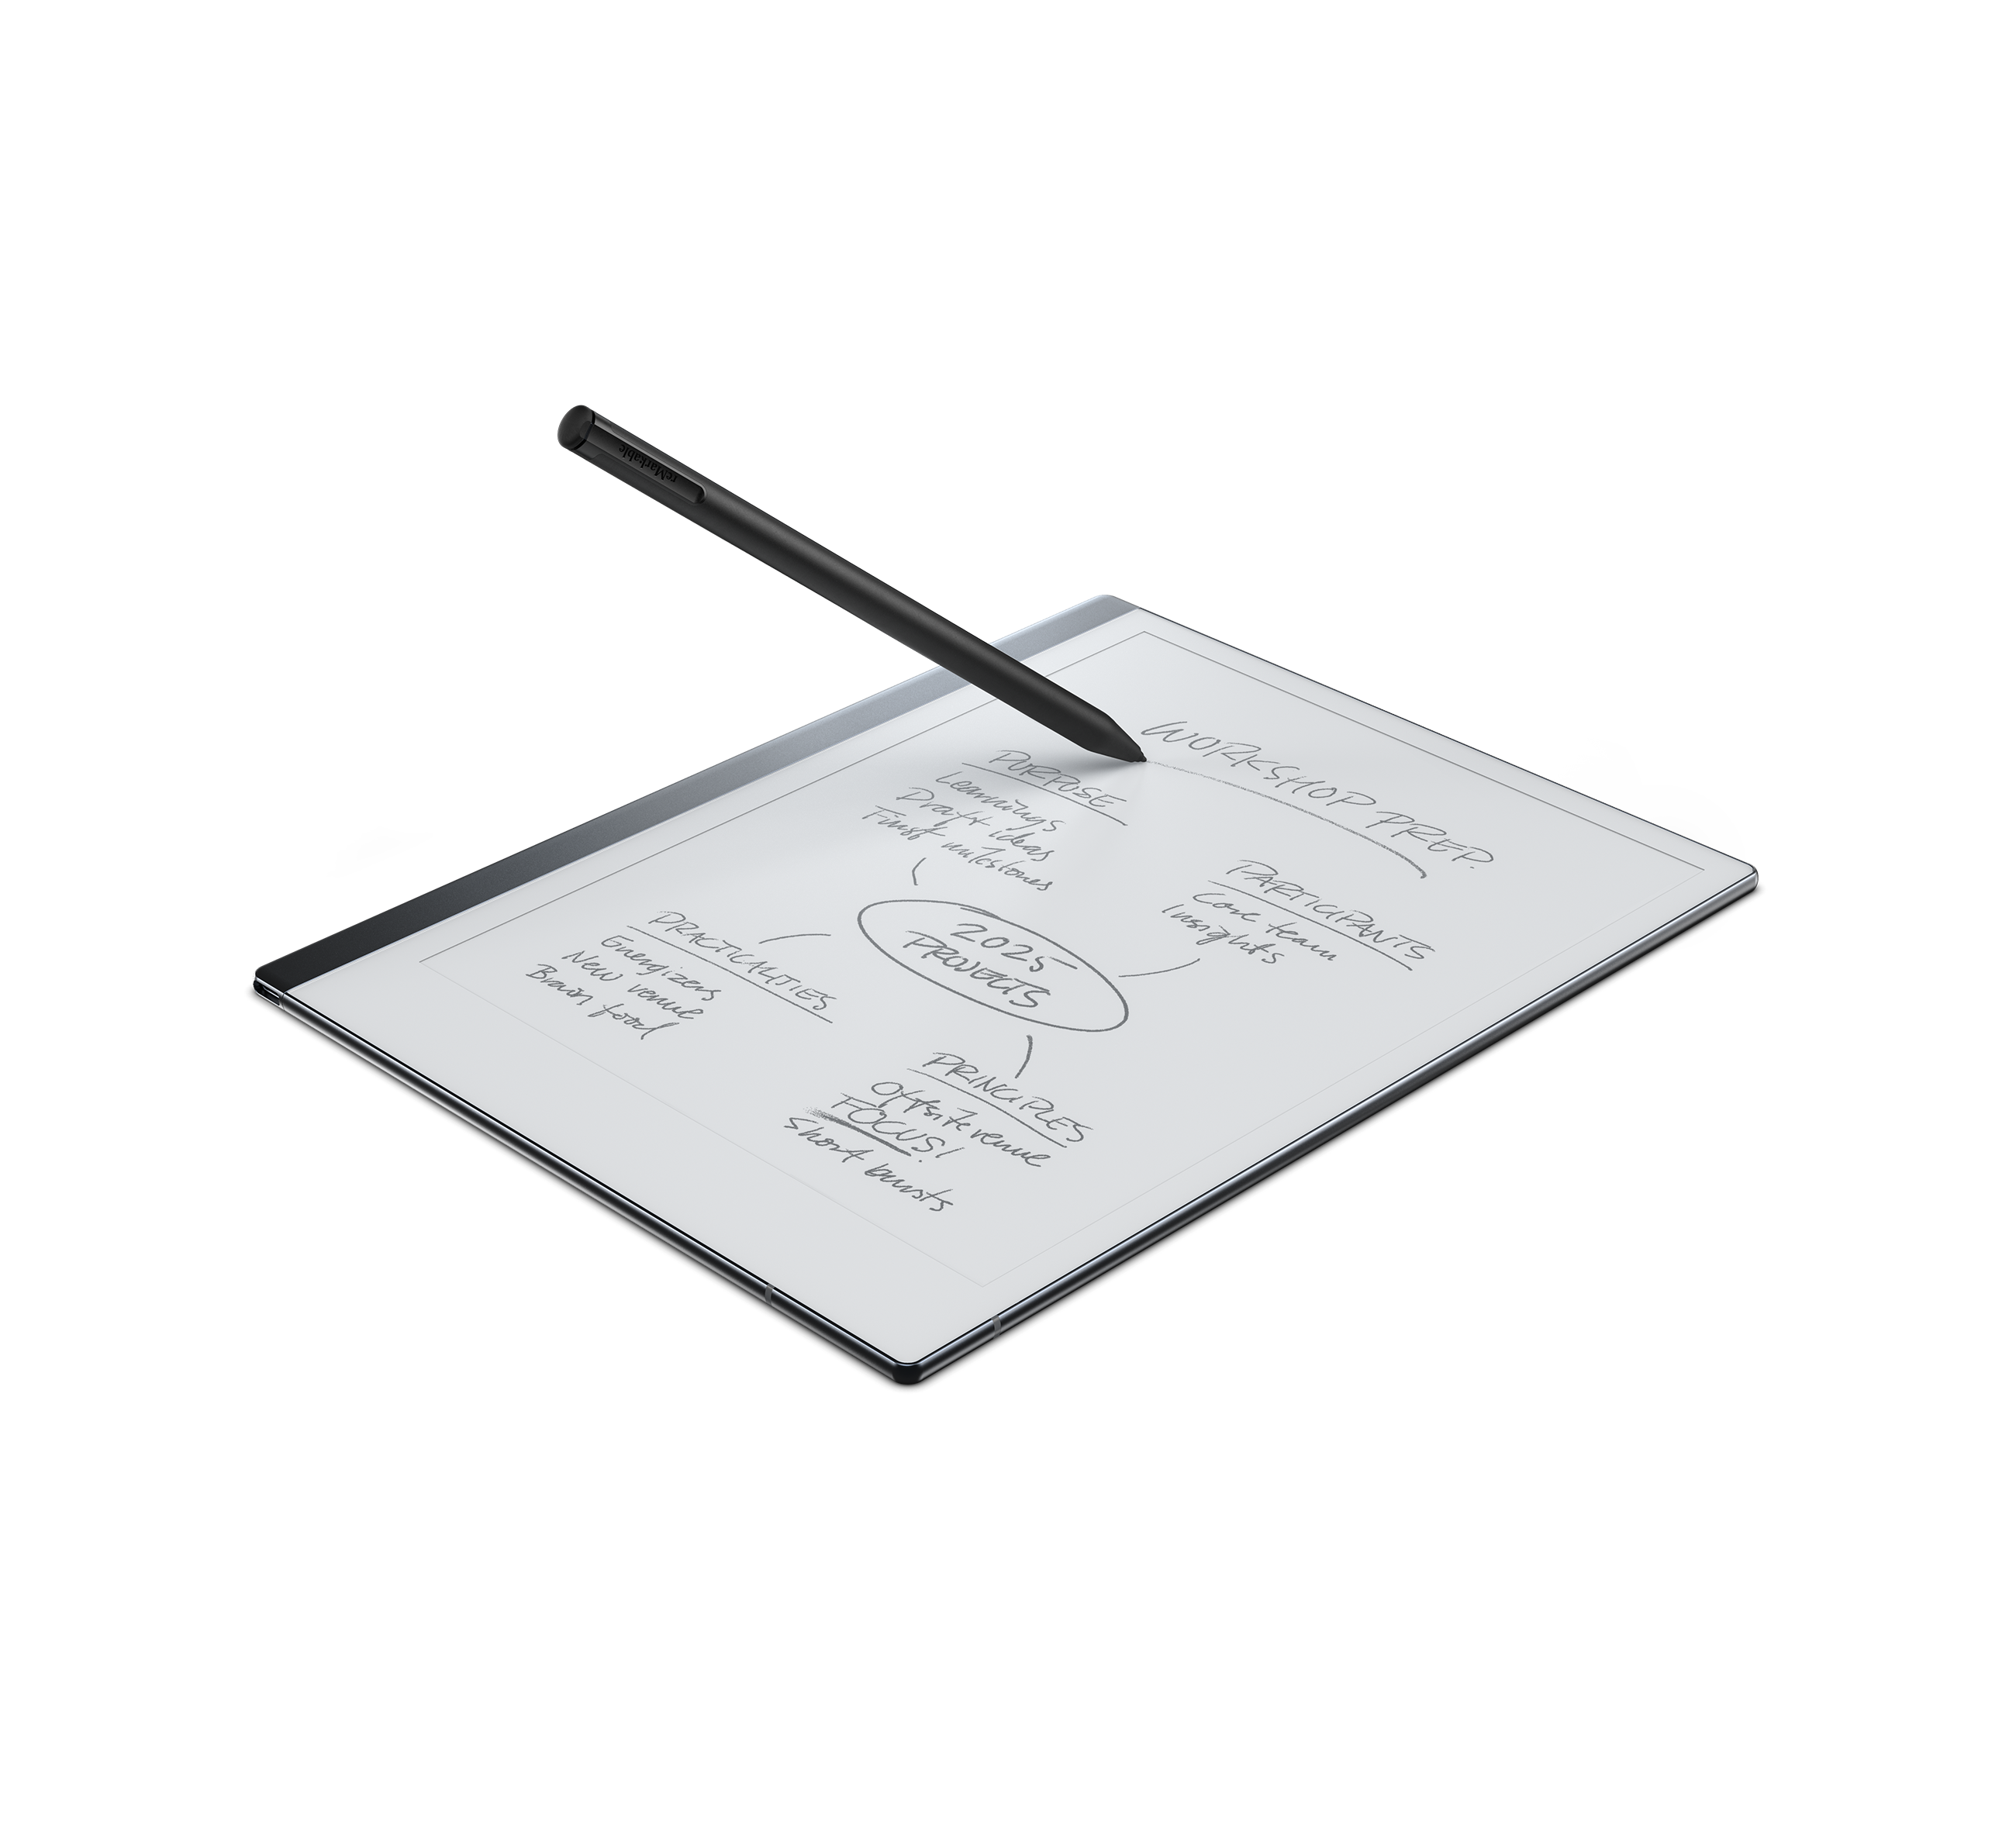 reMarkable 2. The next-generation paper tablet., Introducing reMarkable 2.  A revolutionary way to take notes, read, and review documents. Pre-order  now and take advantage of our launch offer., By reMarkable, tablette  remarkable